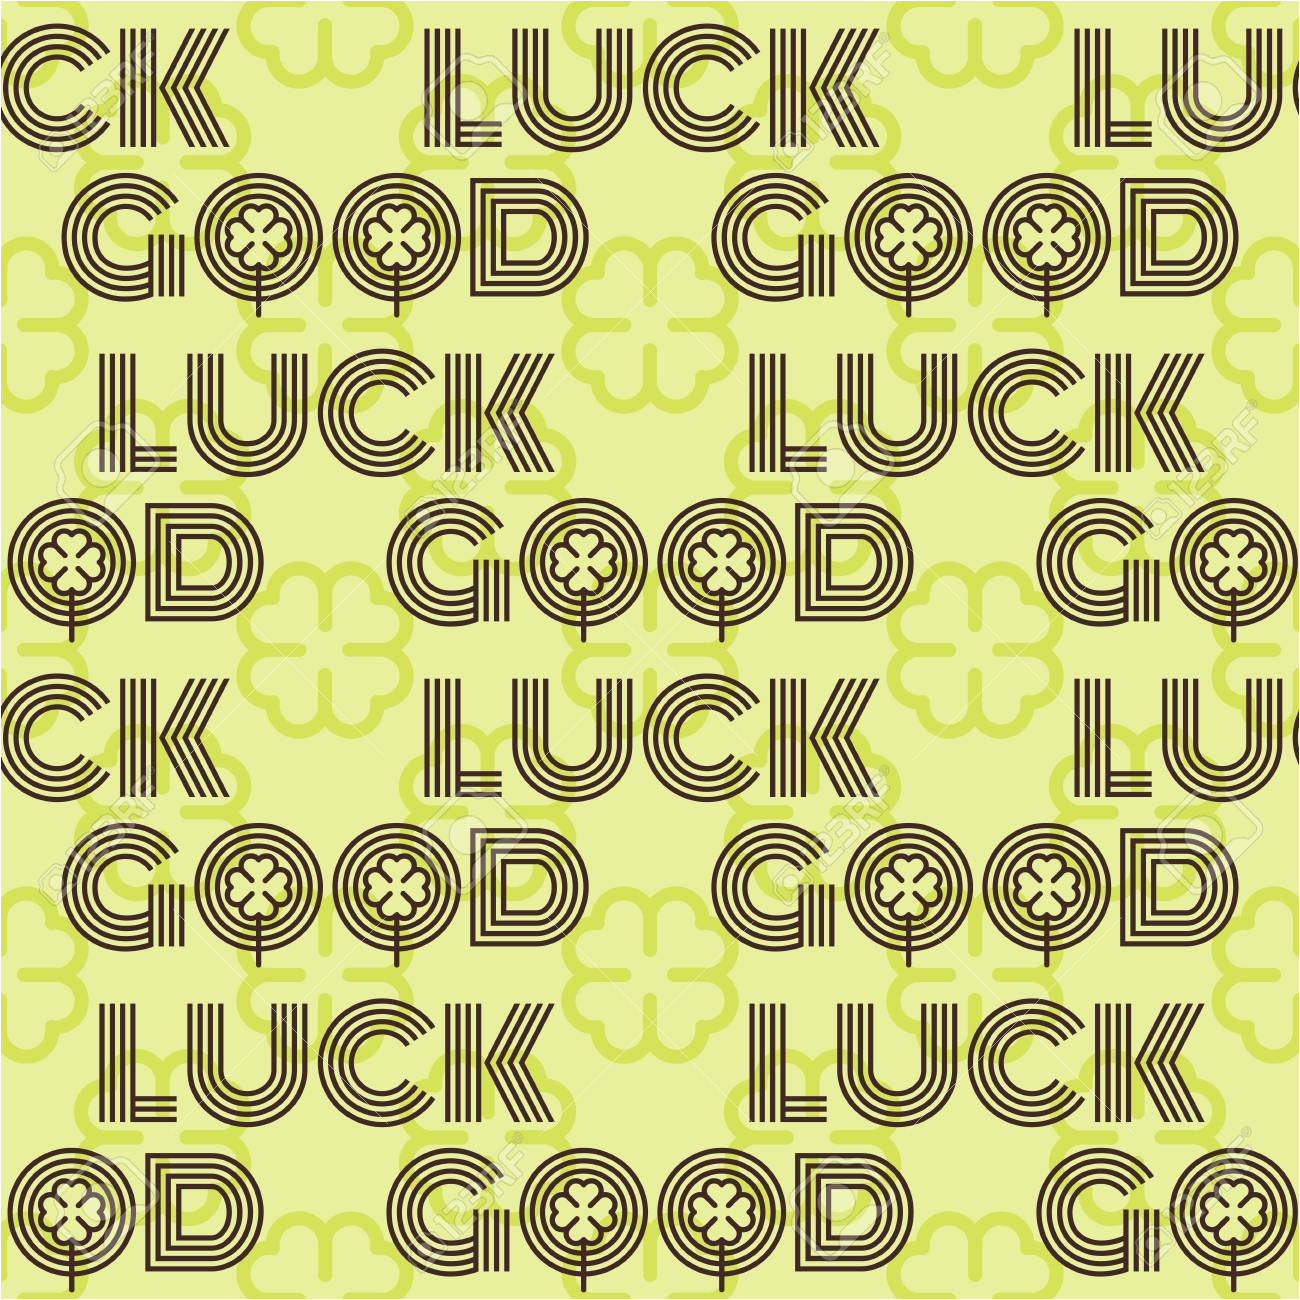 77073995 good luck seamless pattern farewell vector lettering with lucky phrase background greeting typograph jpg